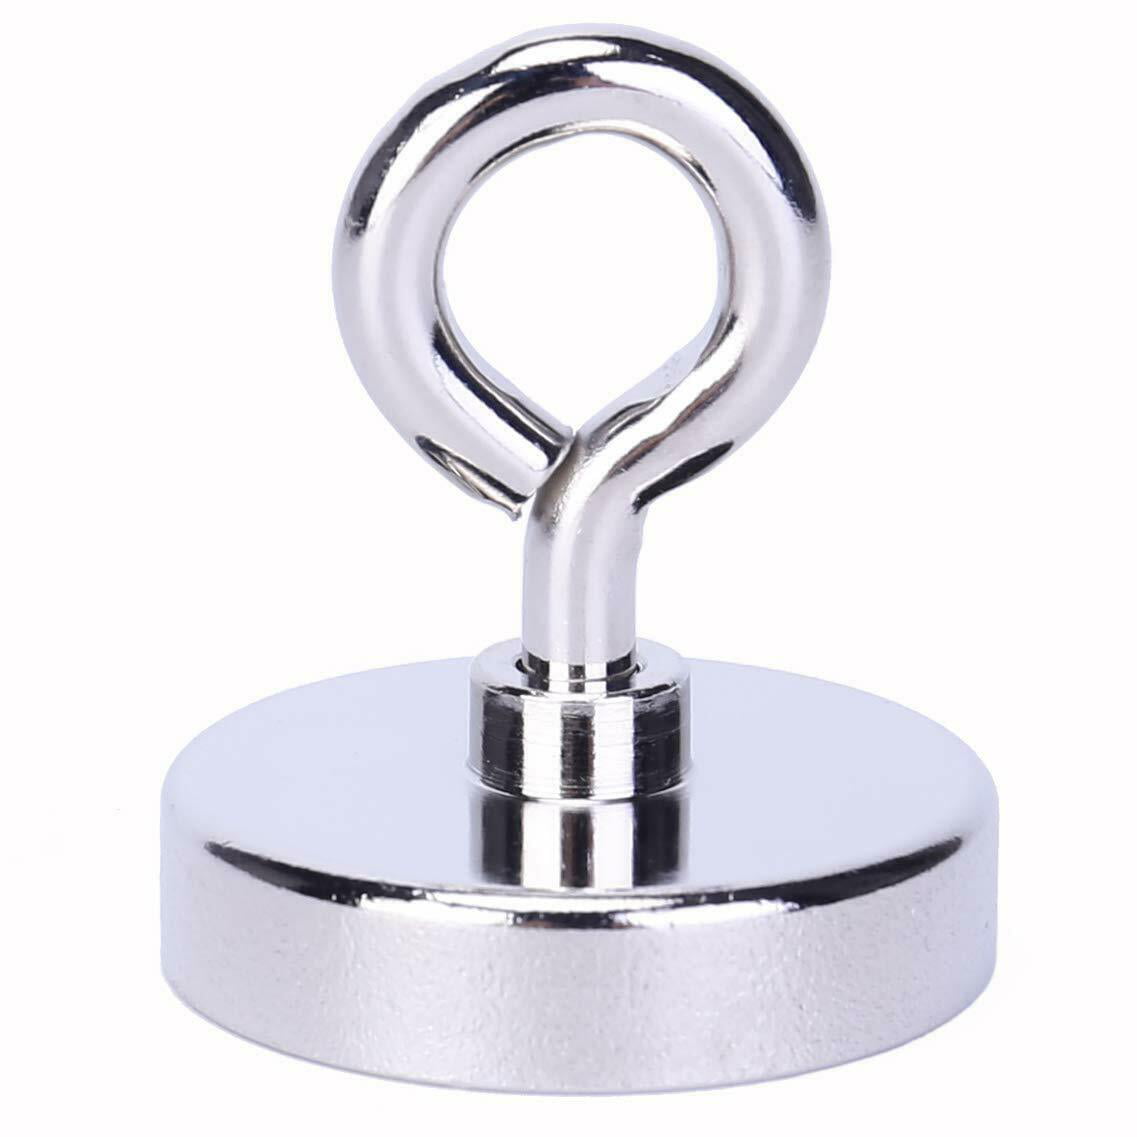 Portable S28esong Round Neodymium Fishing Magnet,Multifunctional Light Magnet Strong Neodymium Magnet with Eyebolt for Magnet Fishing and Salvage in River 